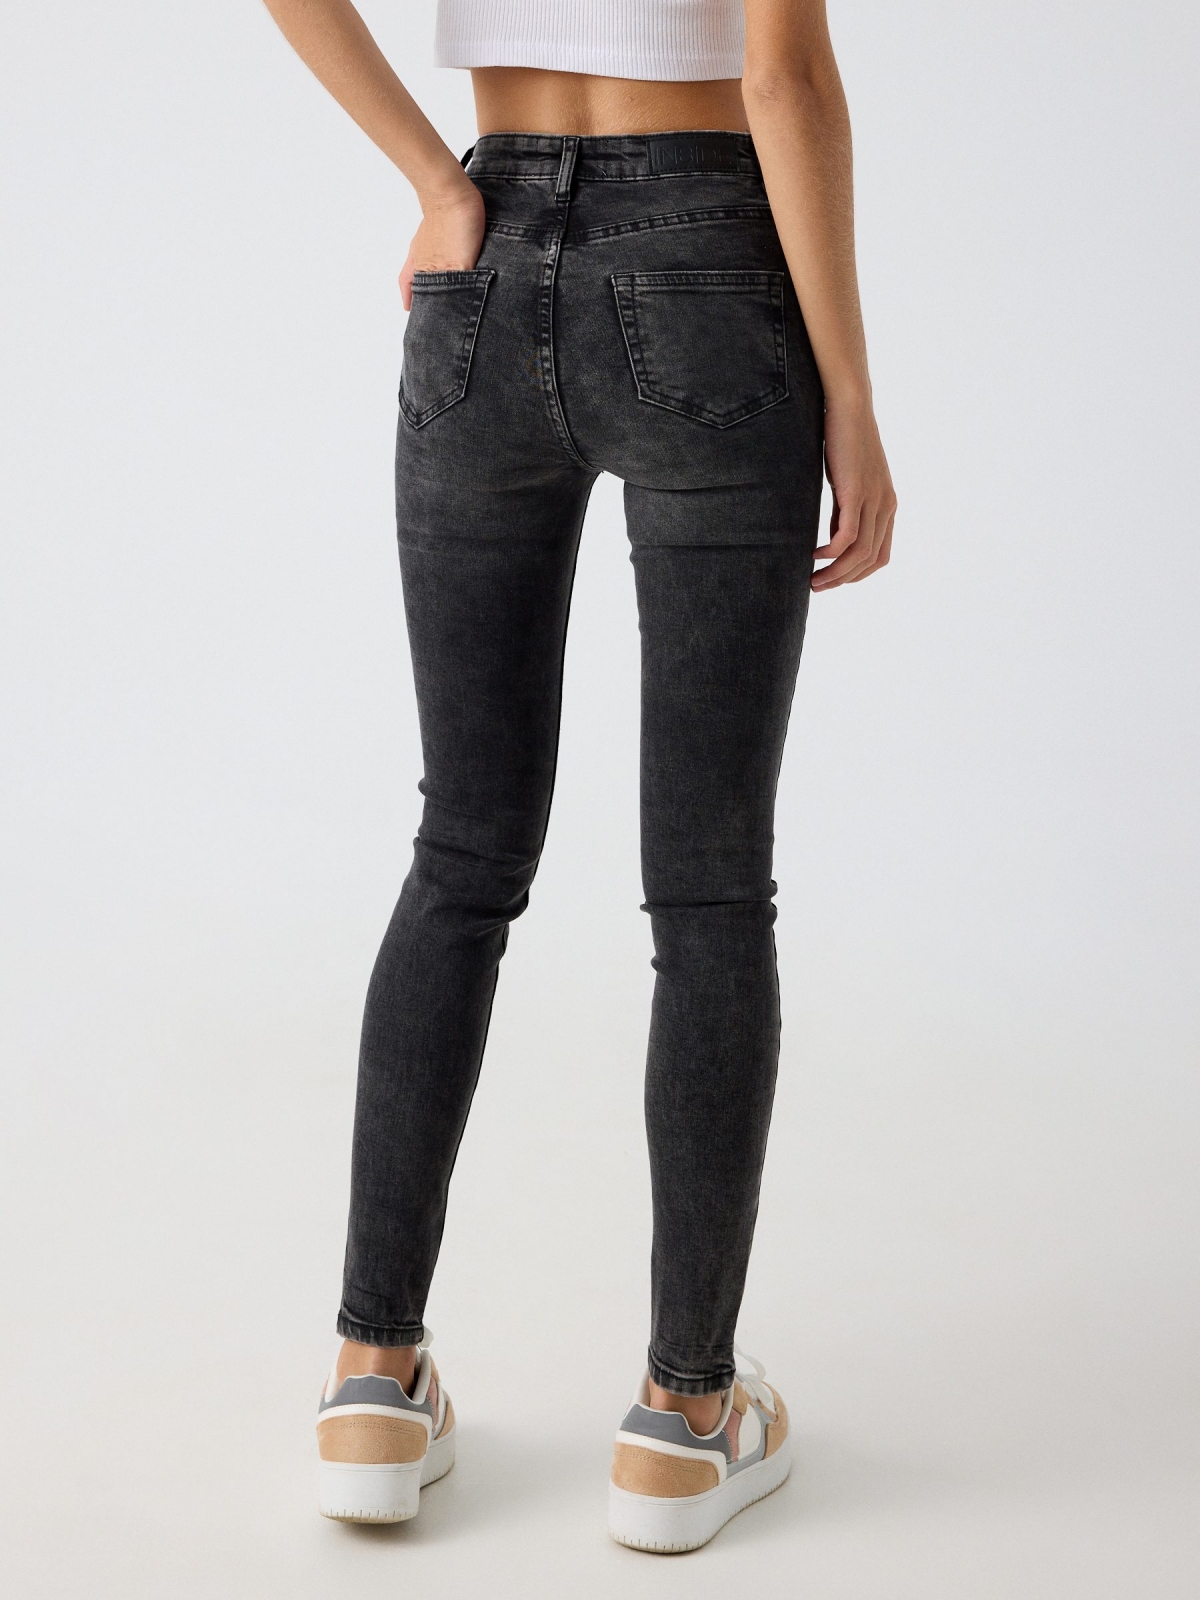 Washed black high waisted skinny jeans black middle back view